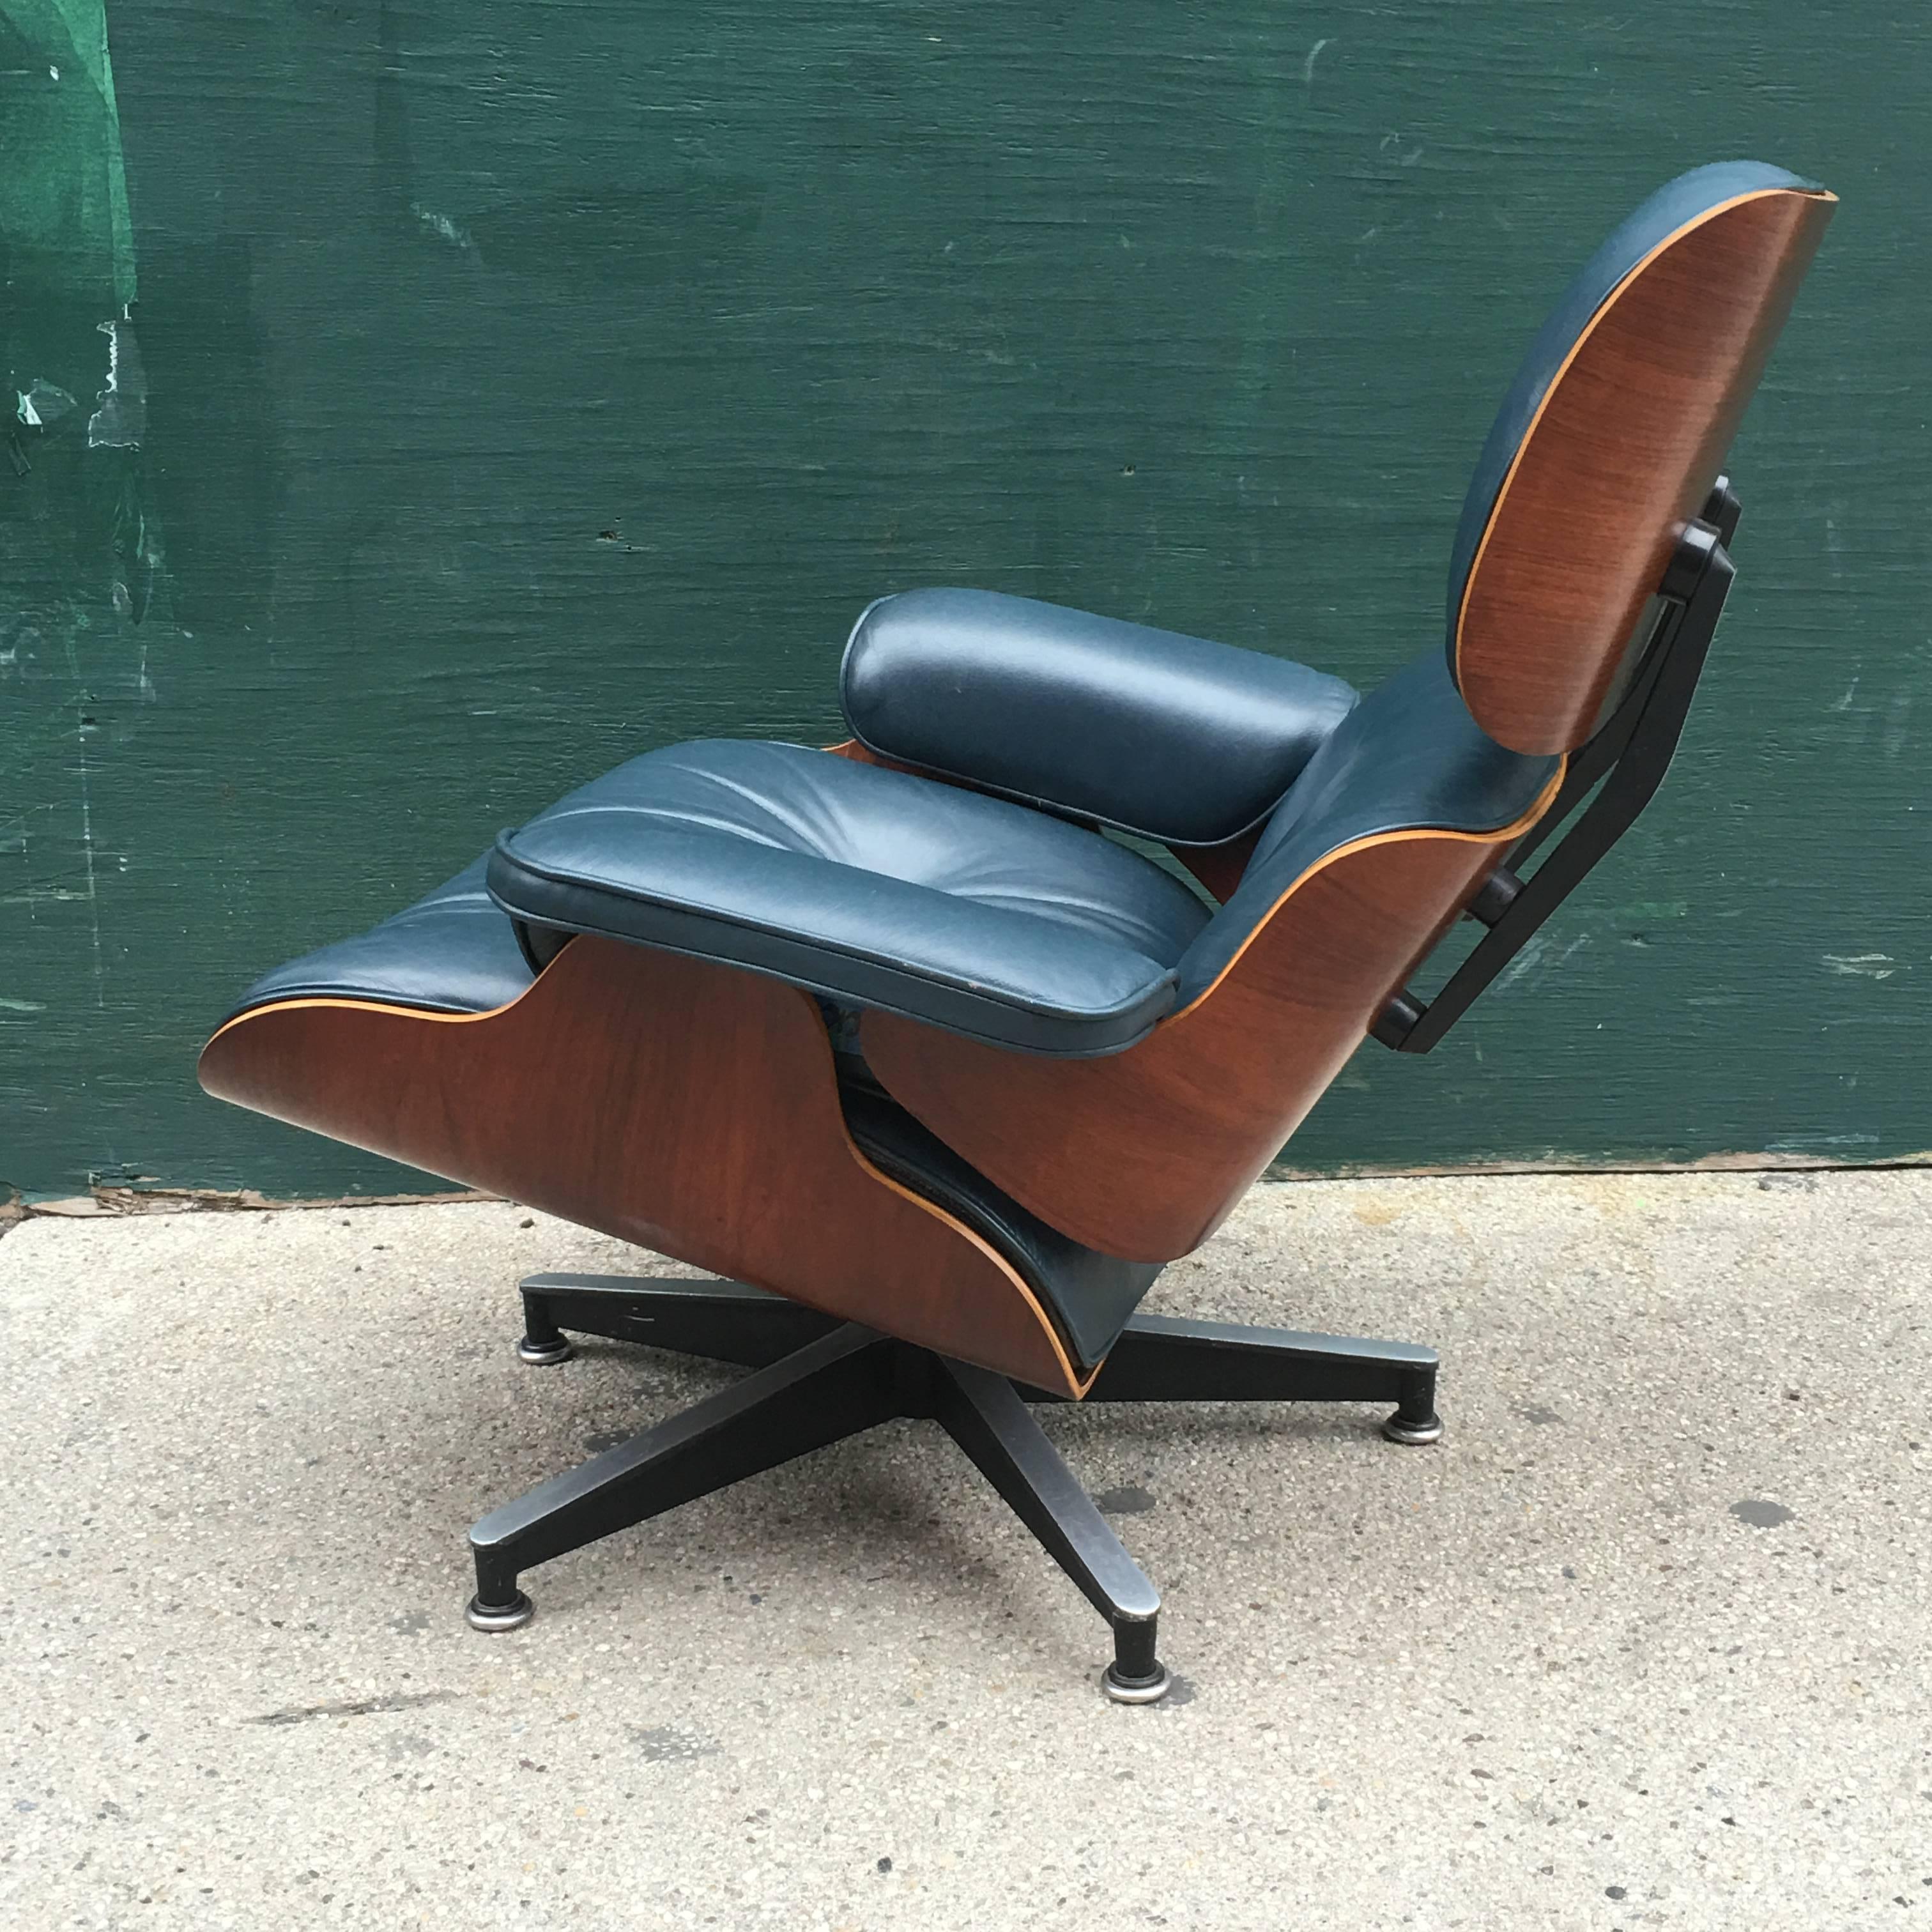 Rosewood Eames lounge chair in rare navy leather. Purchased from original owner. 1970s chair. New shock mounts. No cracking or tears in leather.